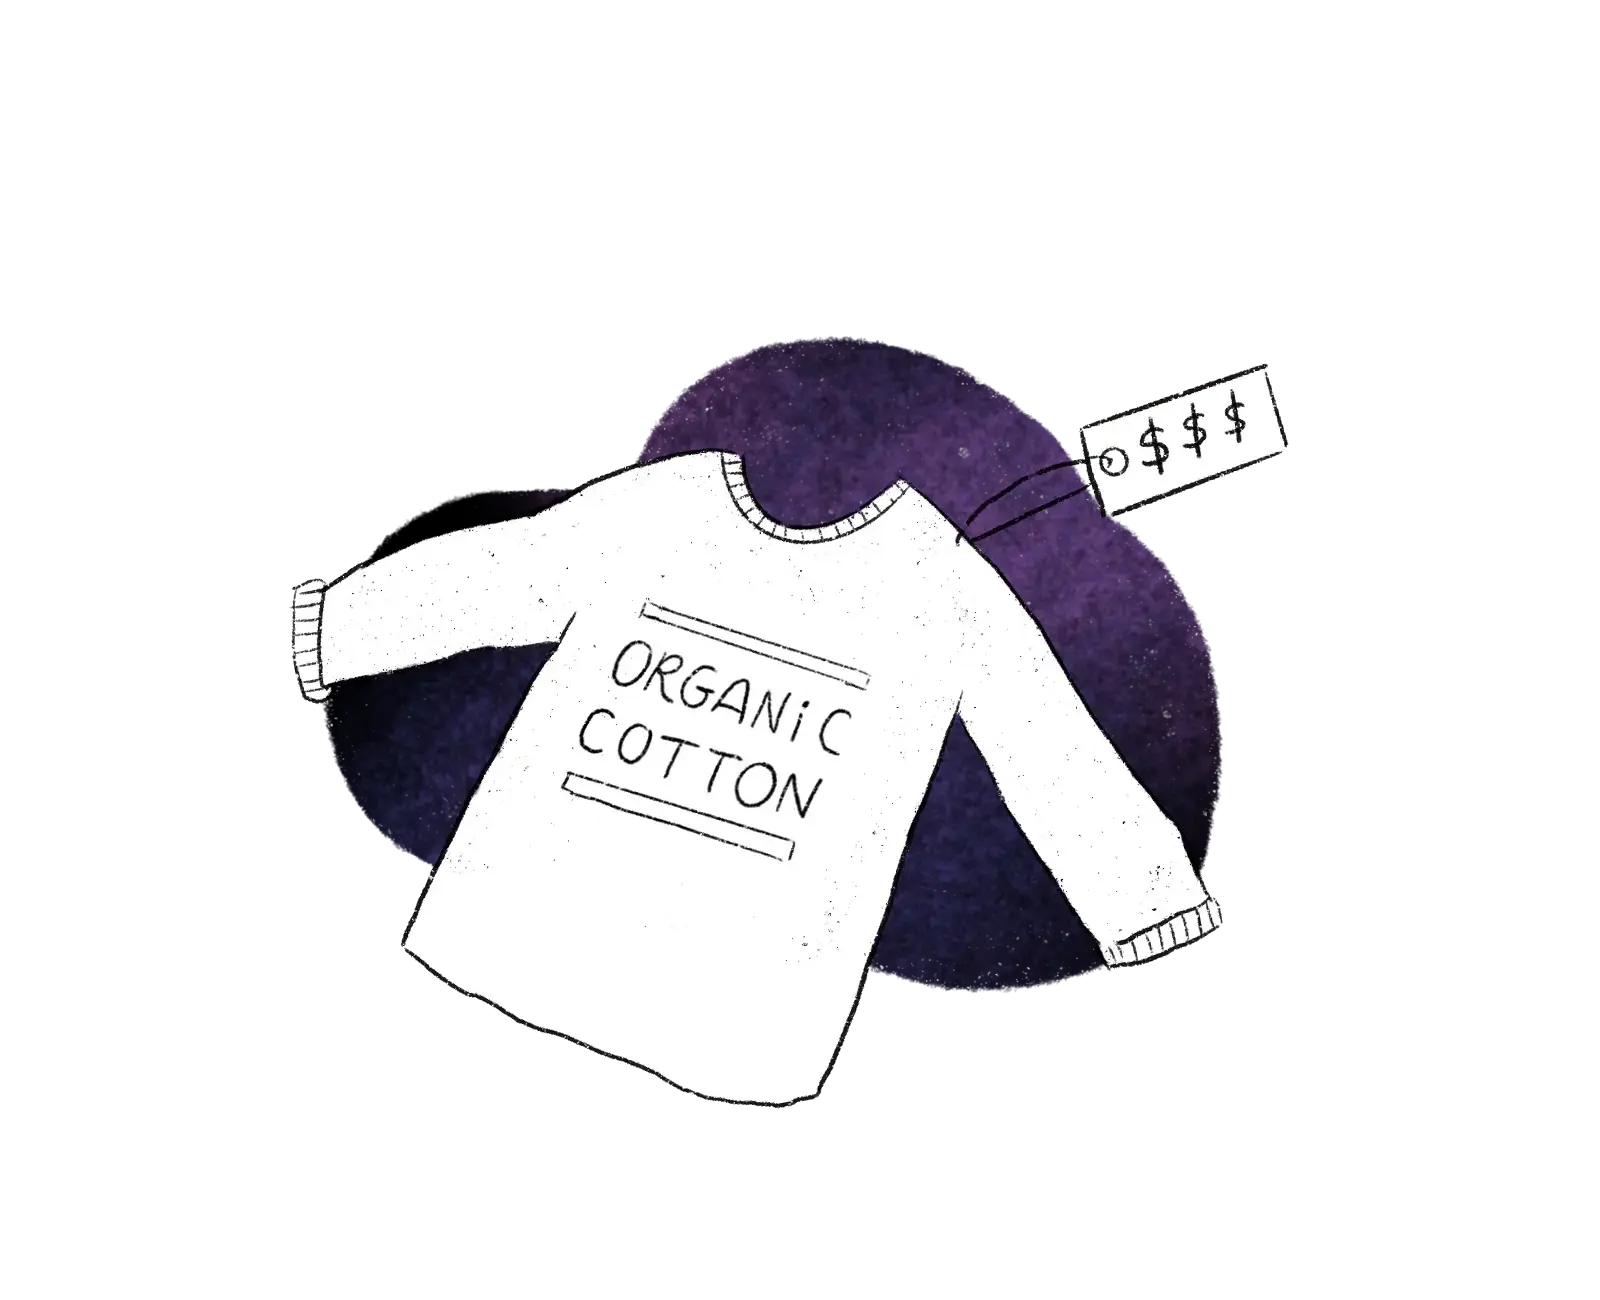 An organic cotton t-shirt with a price tag indicating it is very expensive